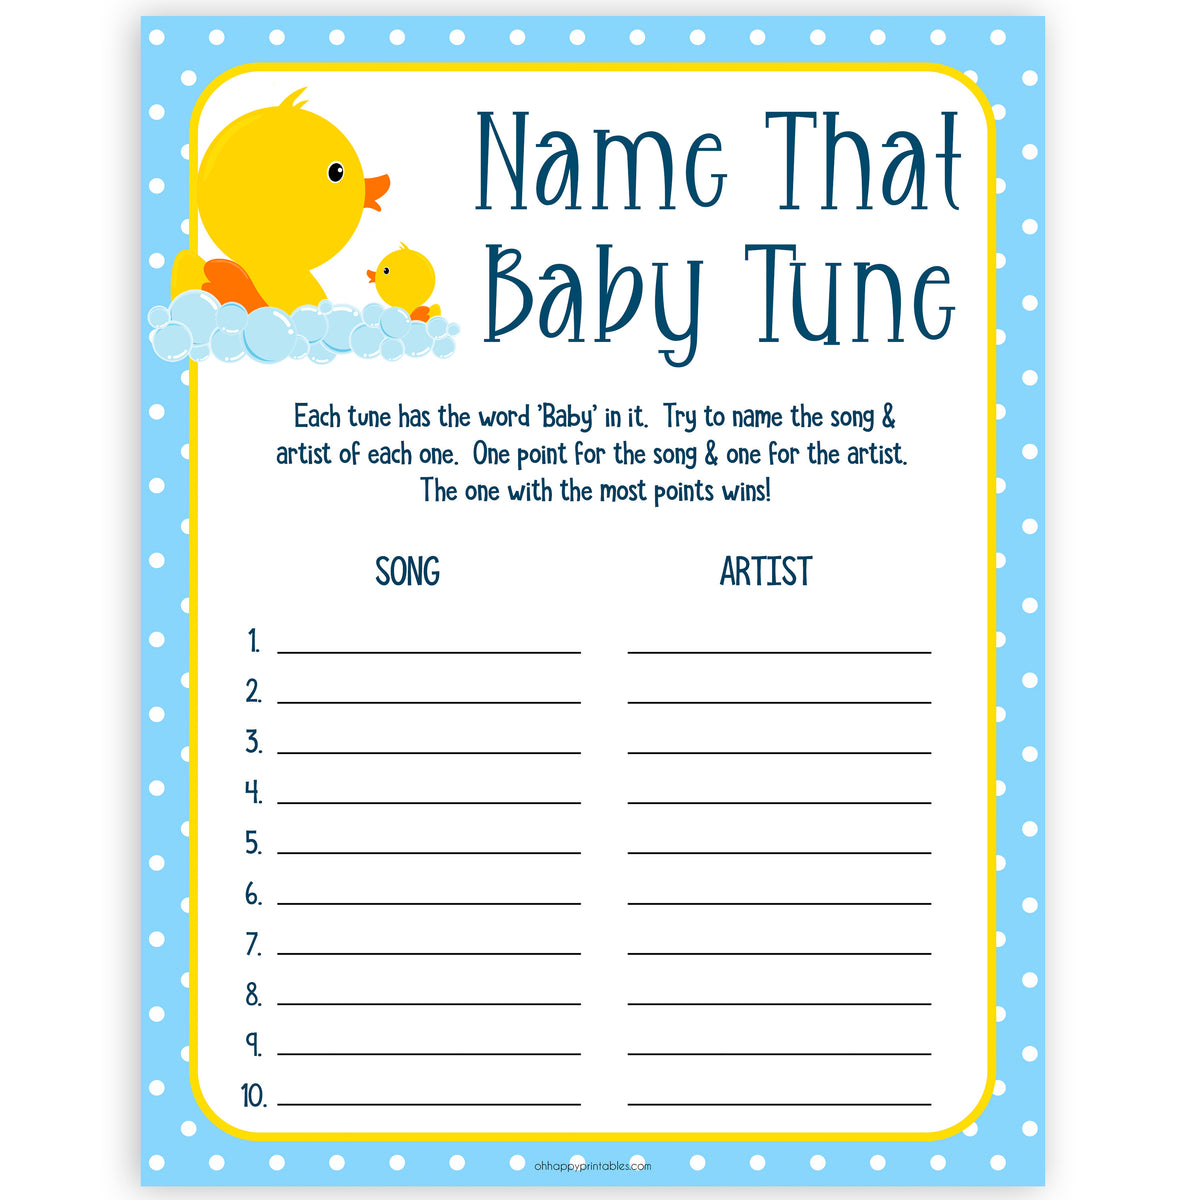 rubber ducky baby games, name that baby tune baby game, printable baby games, baby shower games, rubber ducky baby theme, fun baby games, popular baby games